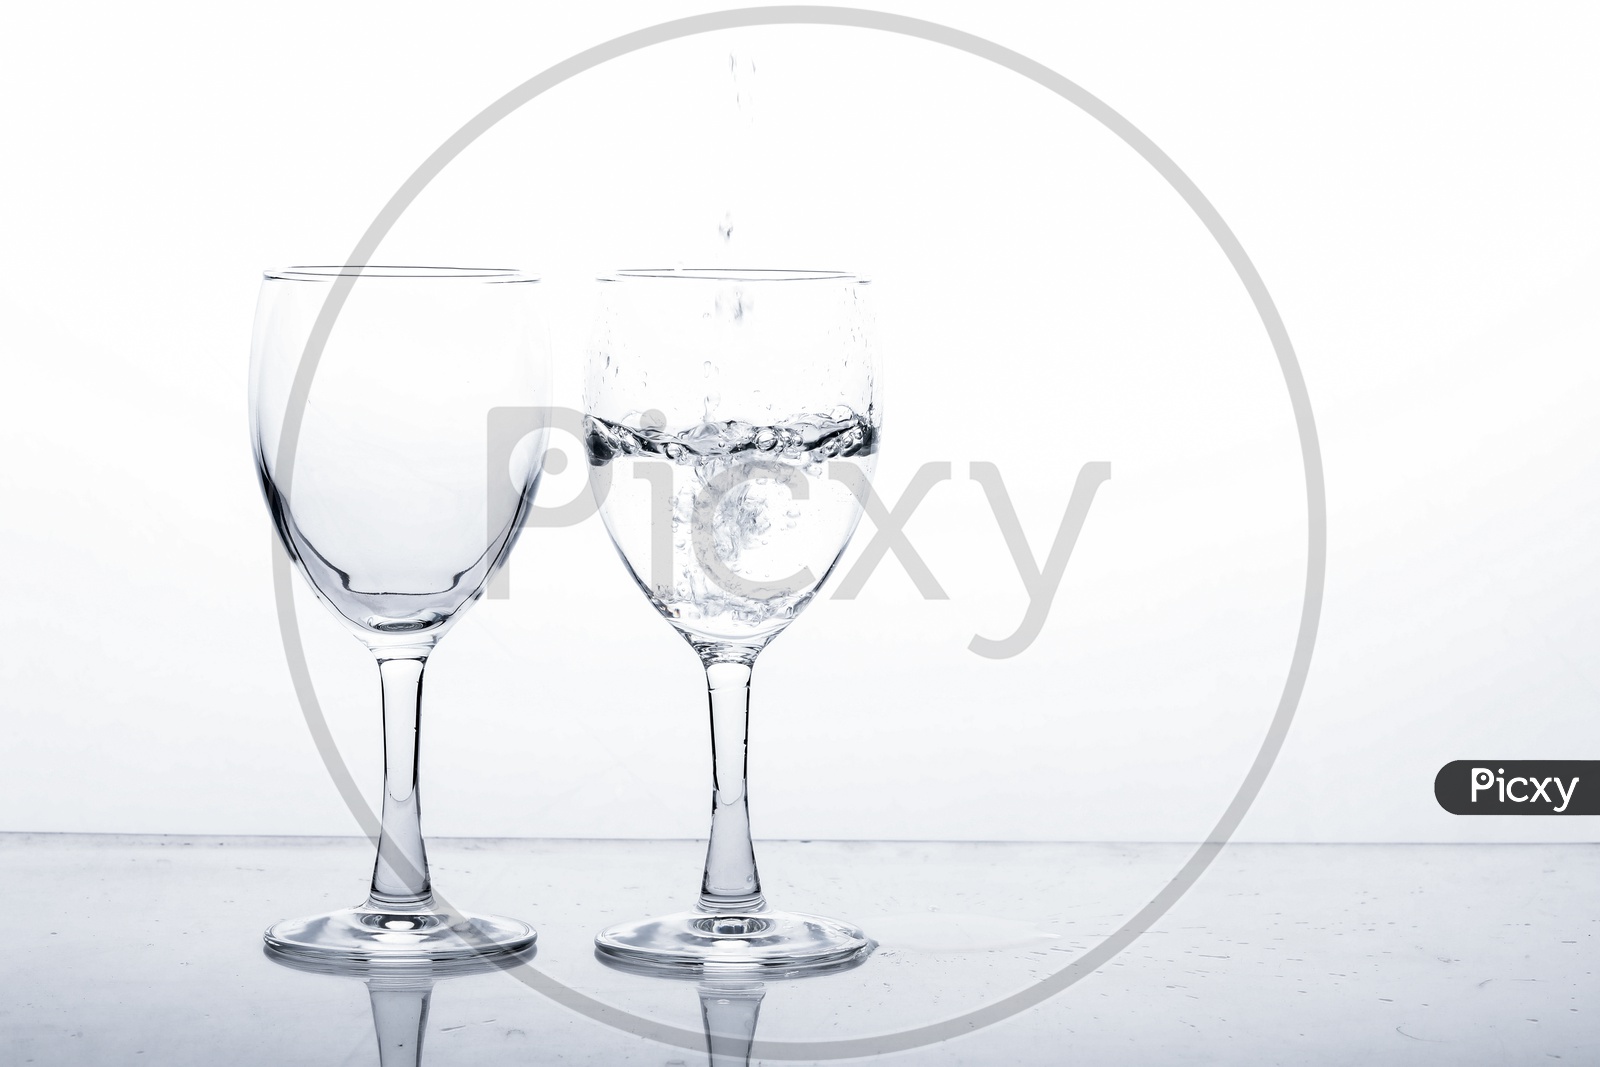 Empty Wine Glasses Filled With Water and Water Splash  On an Isolated White Background